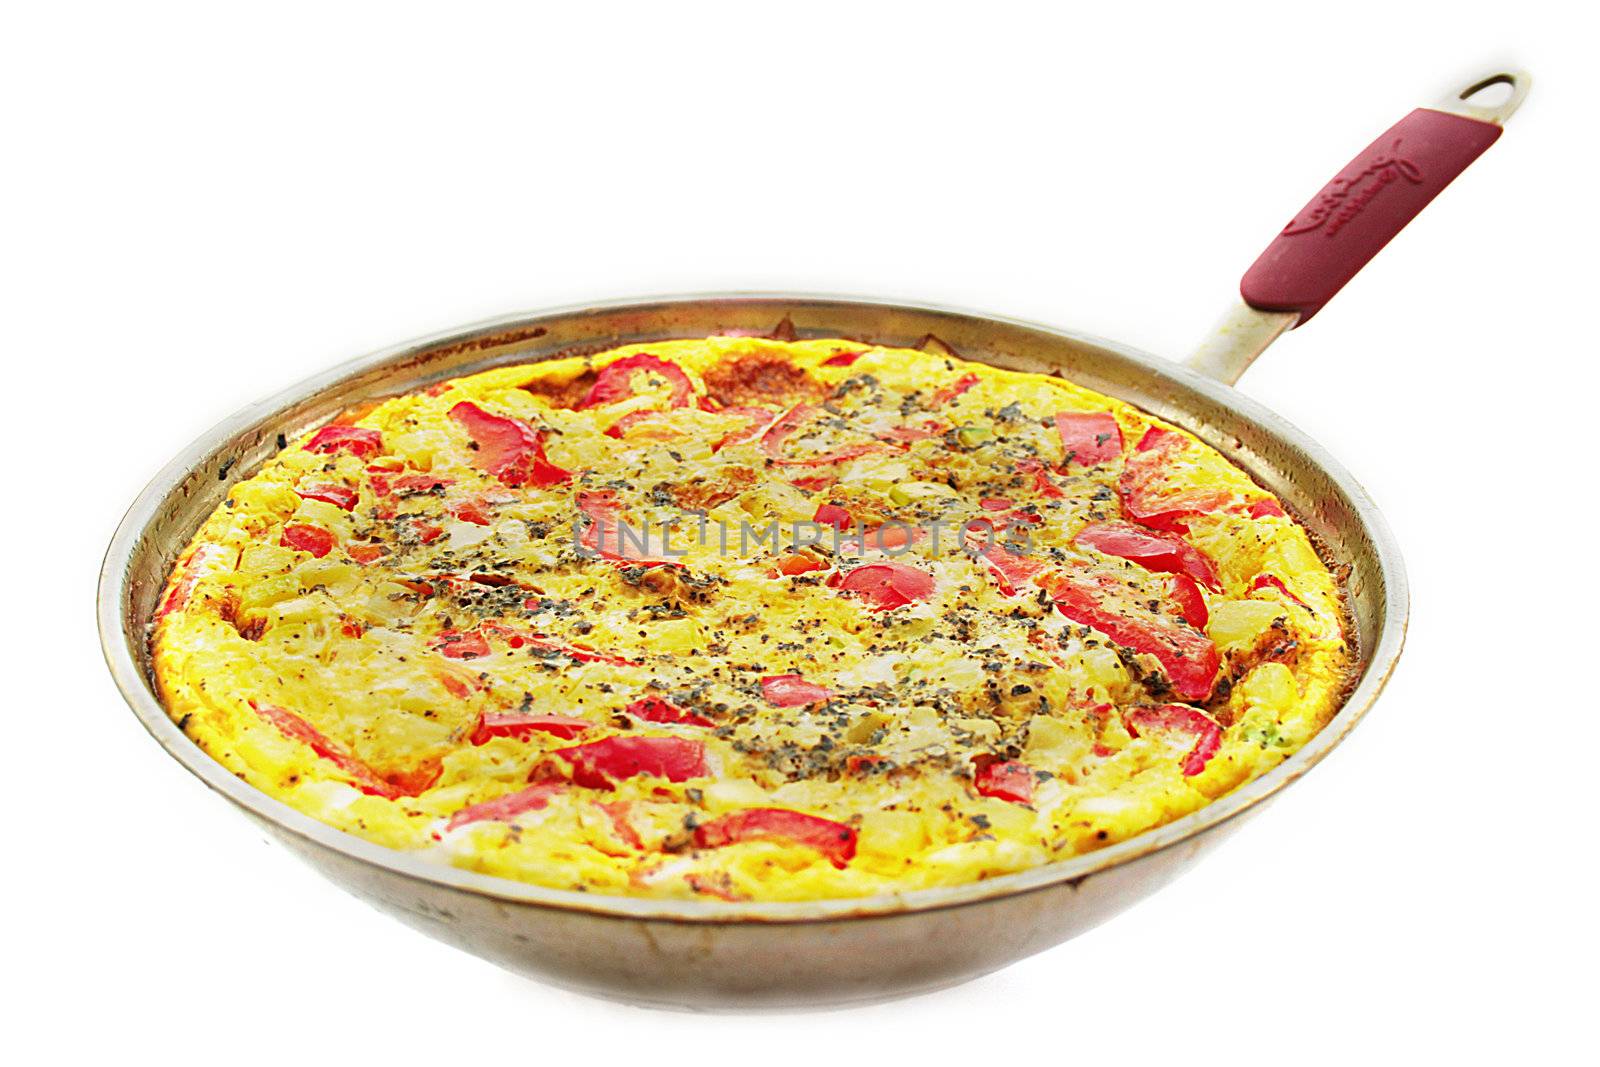 Ready omelette with vegetables in a frying pan.